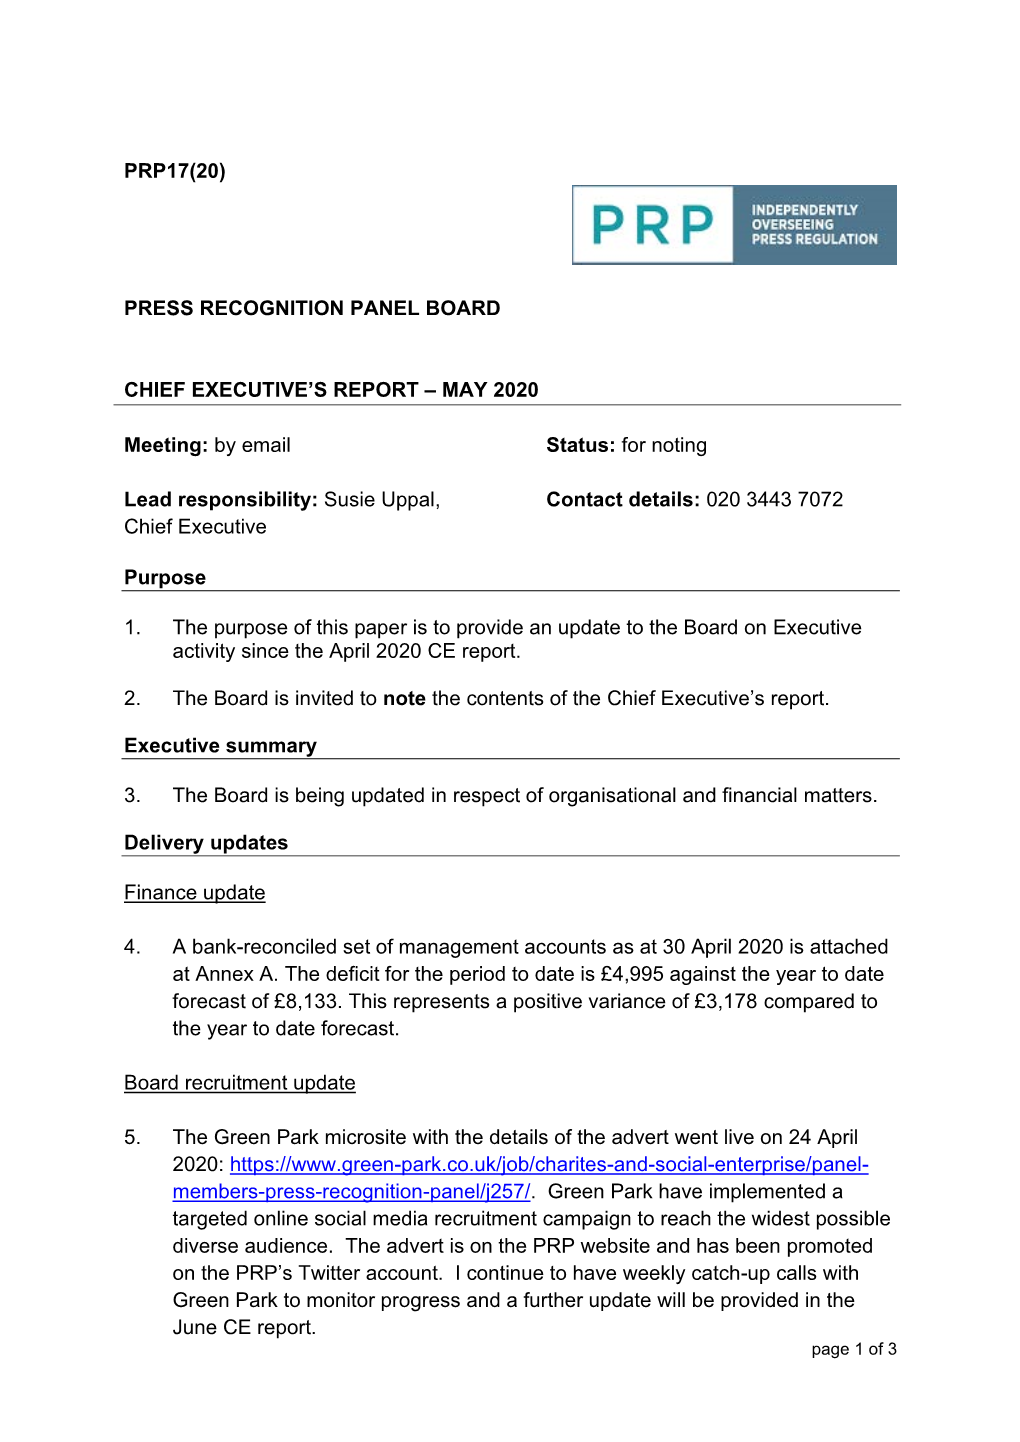 Chief Executive's Report May 2020